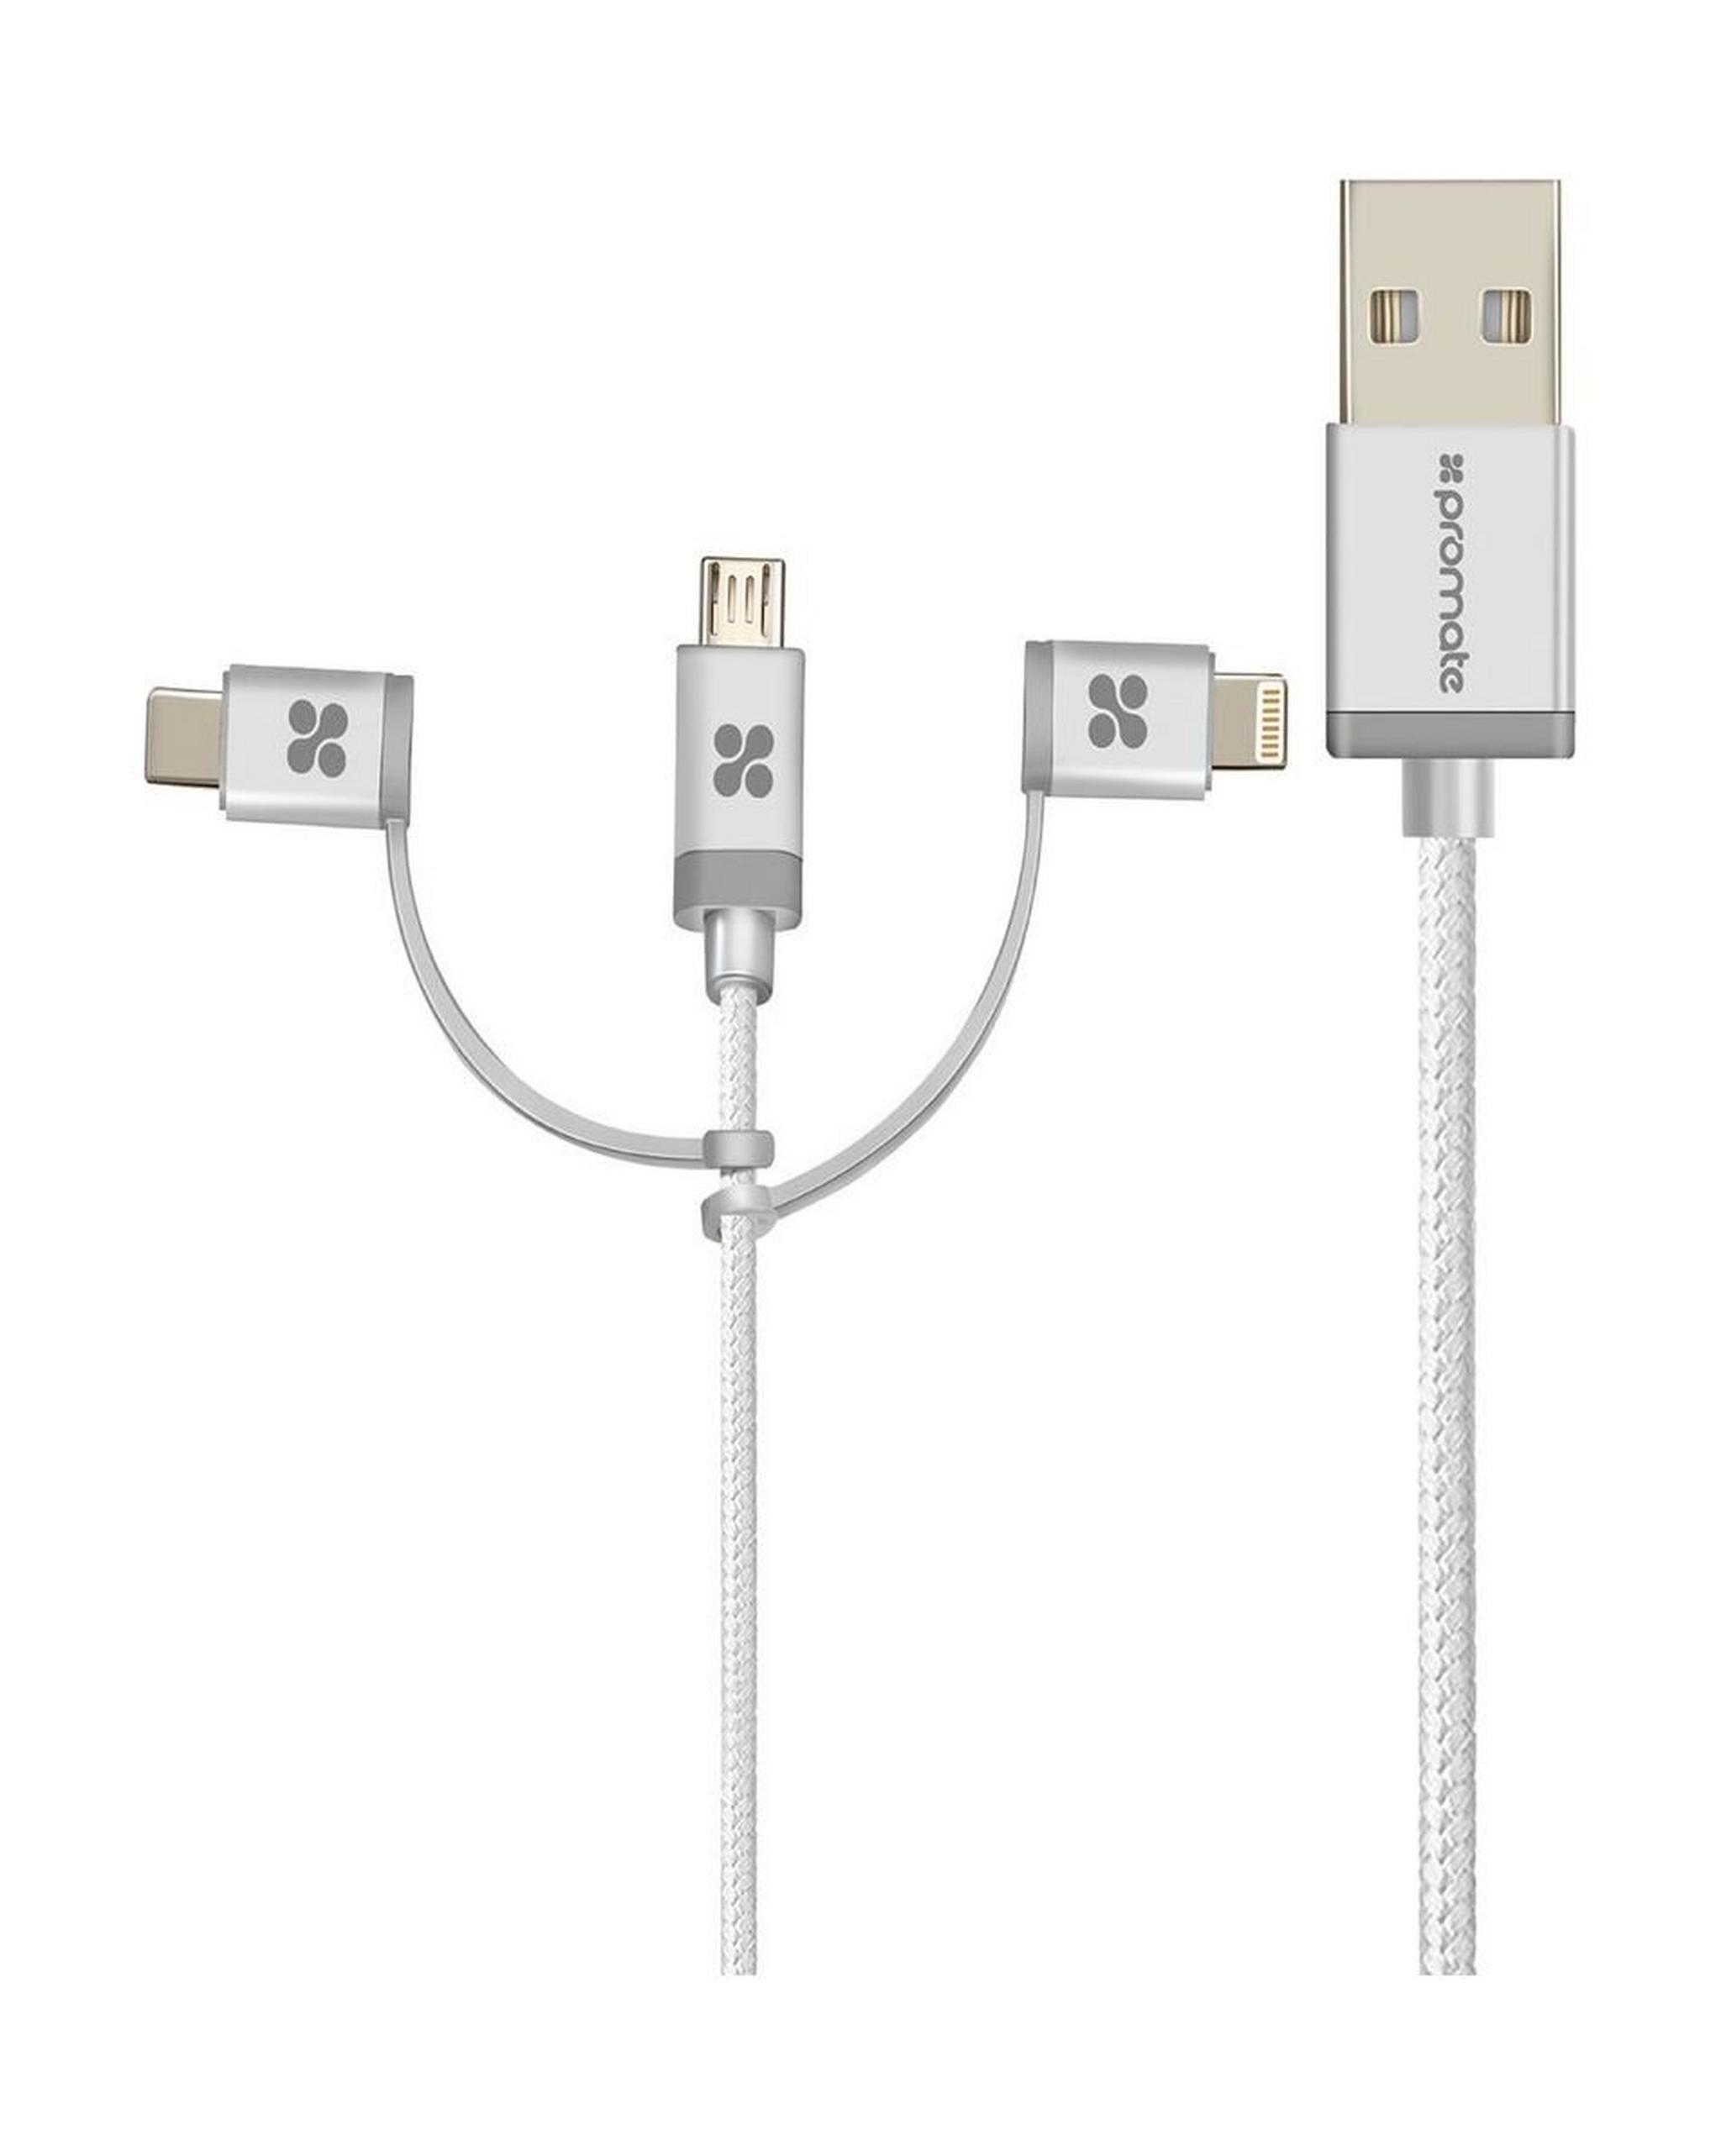 Promate Unilink-TRIO 3-in-1 Multifunctional Universal Sync and Charge Cable 1M - White